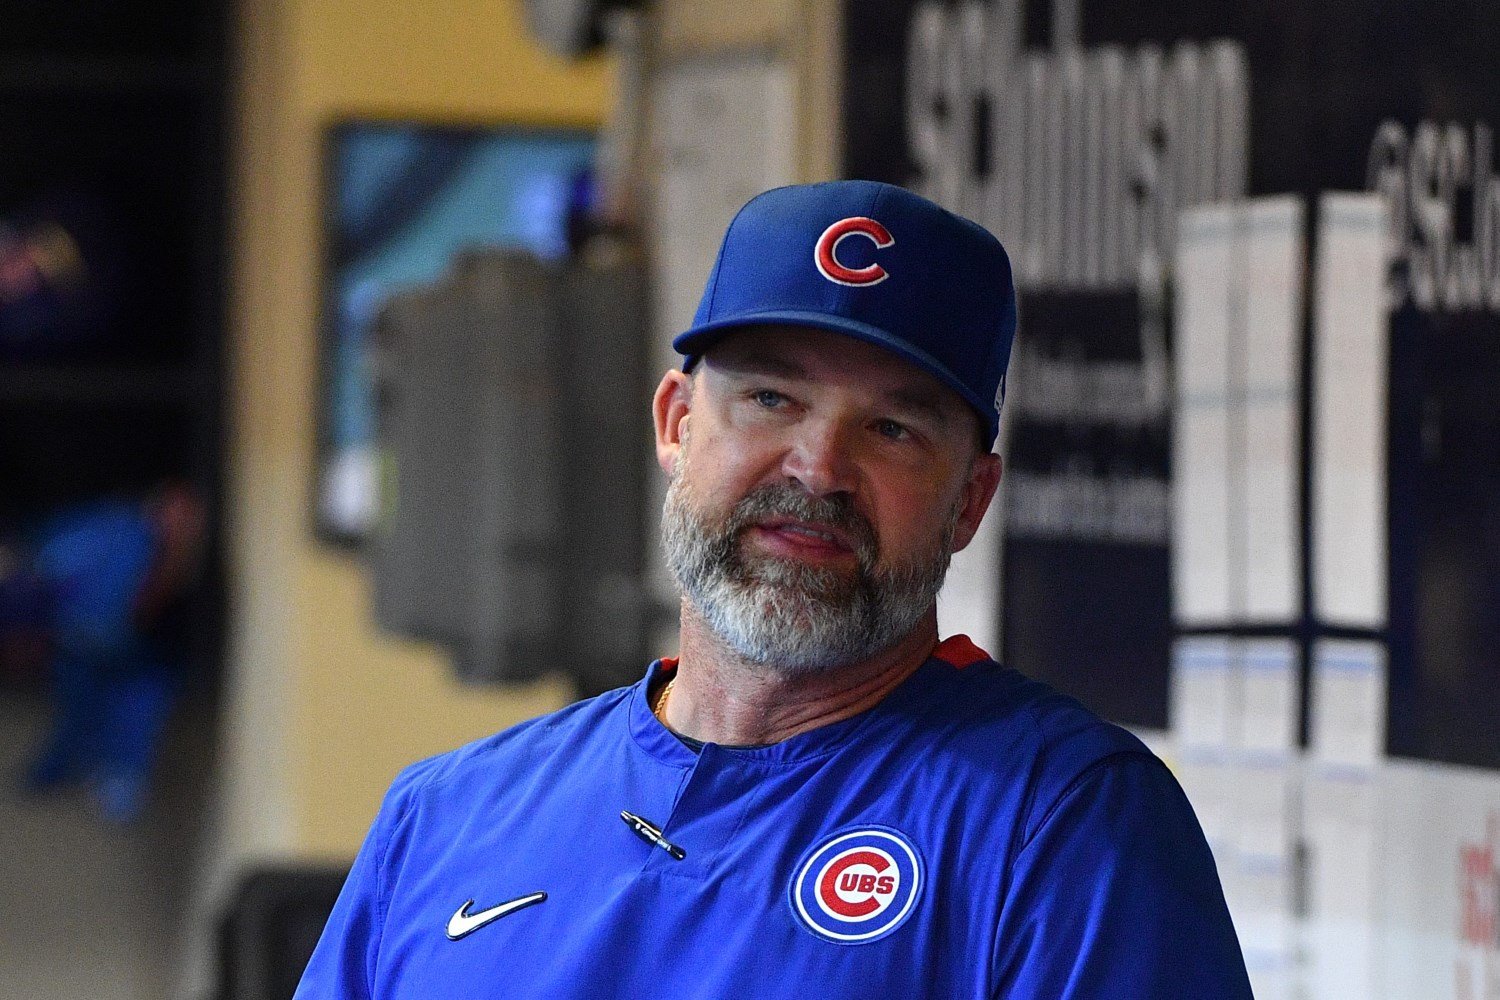 What has surprised Cubs manager David Ross most about this year's